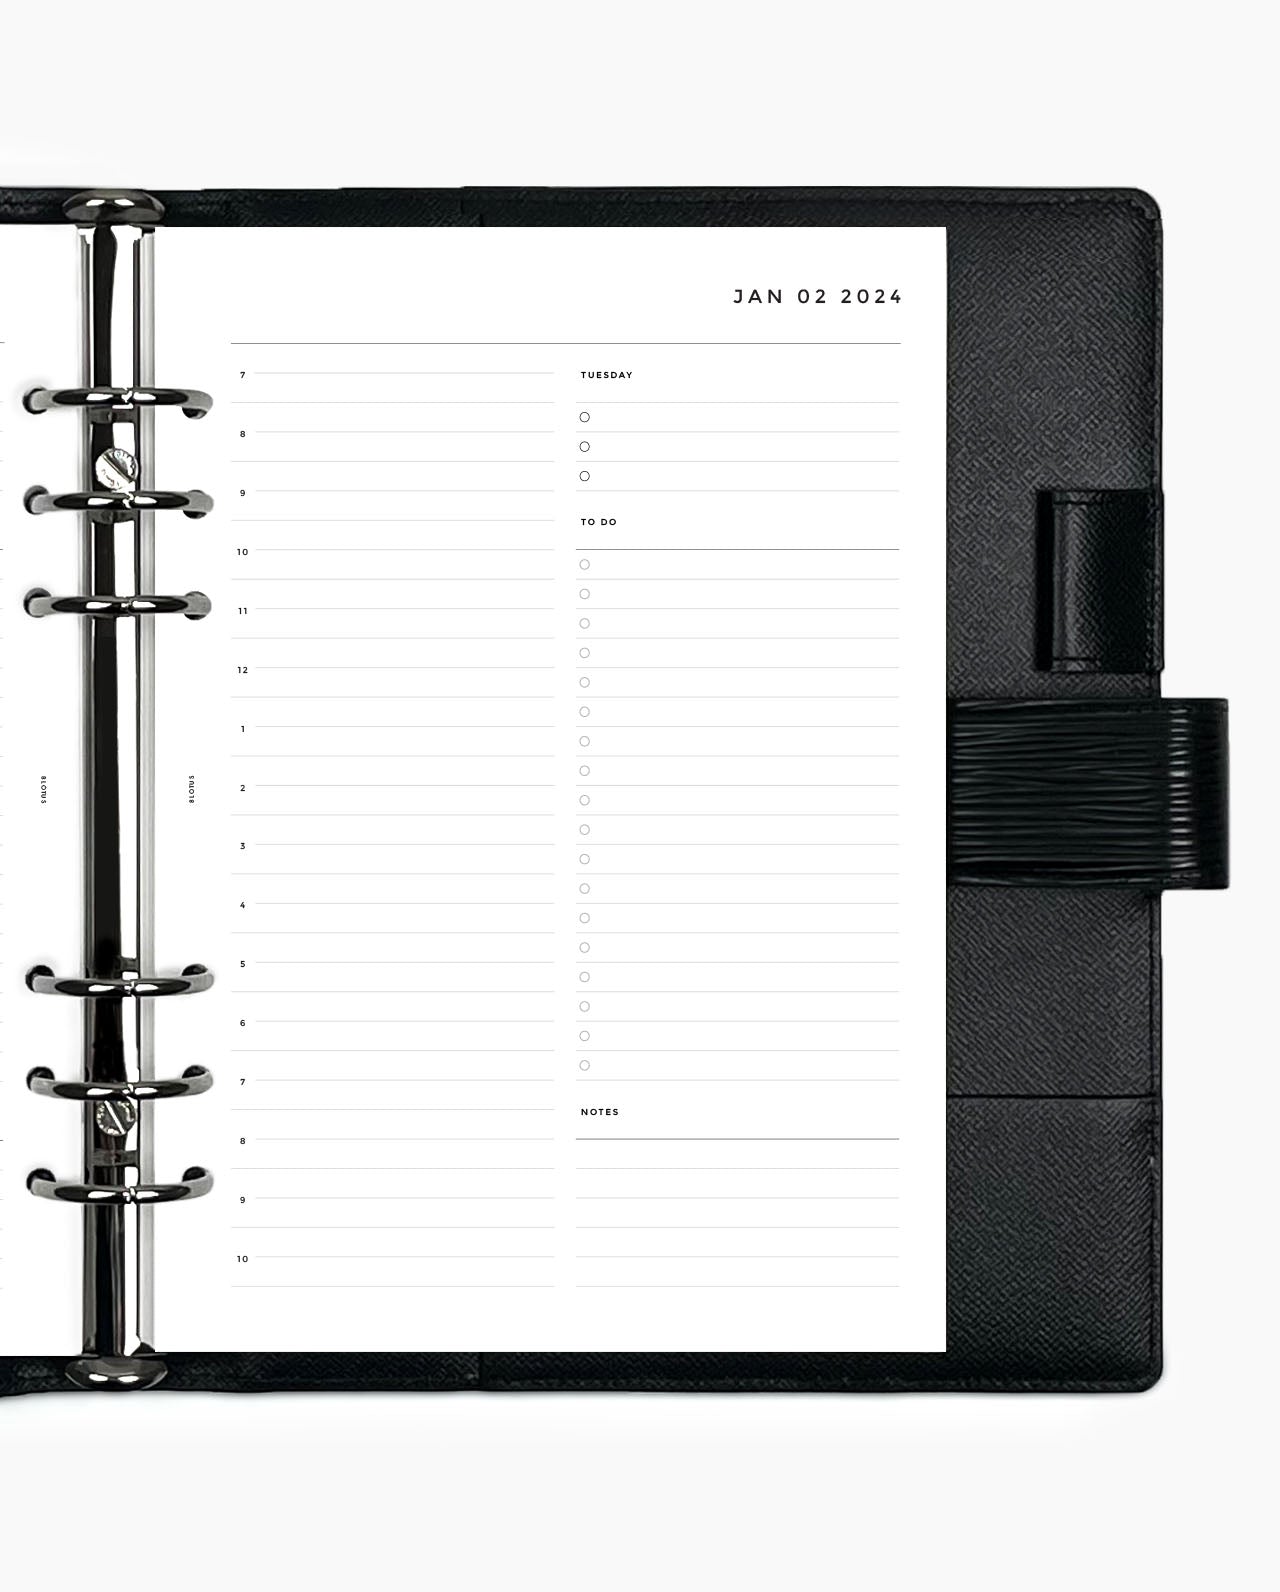 MN076 - 2024 Daily Planner - Half Hour - DO1P (PREORDER)